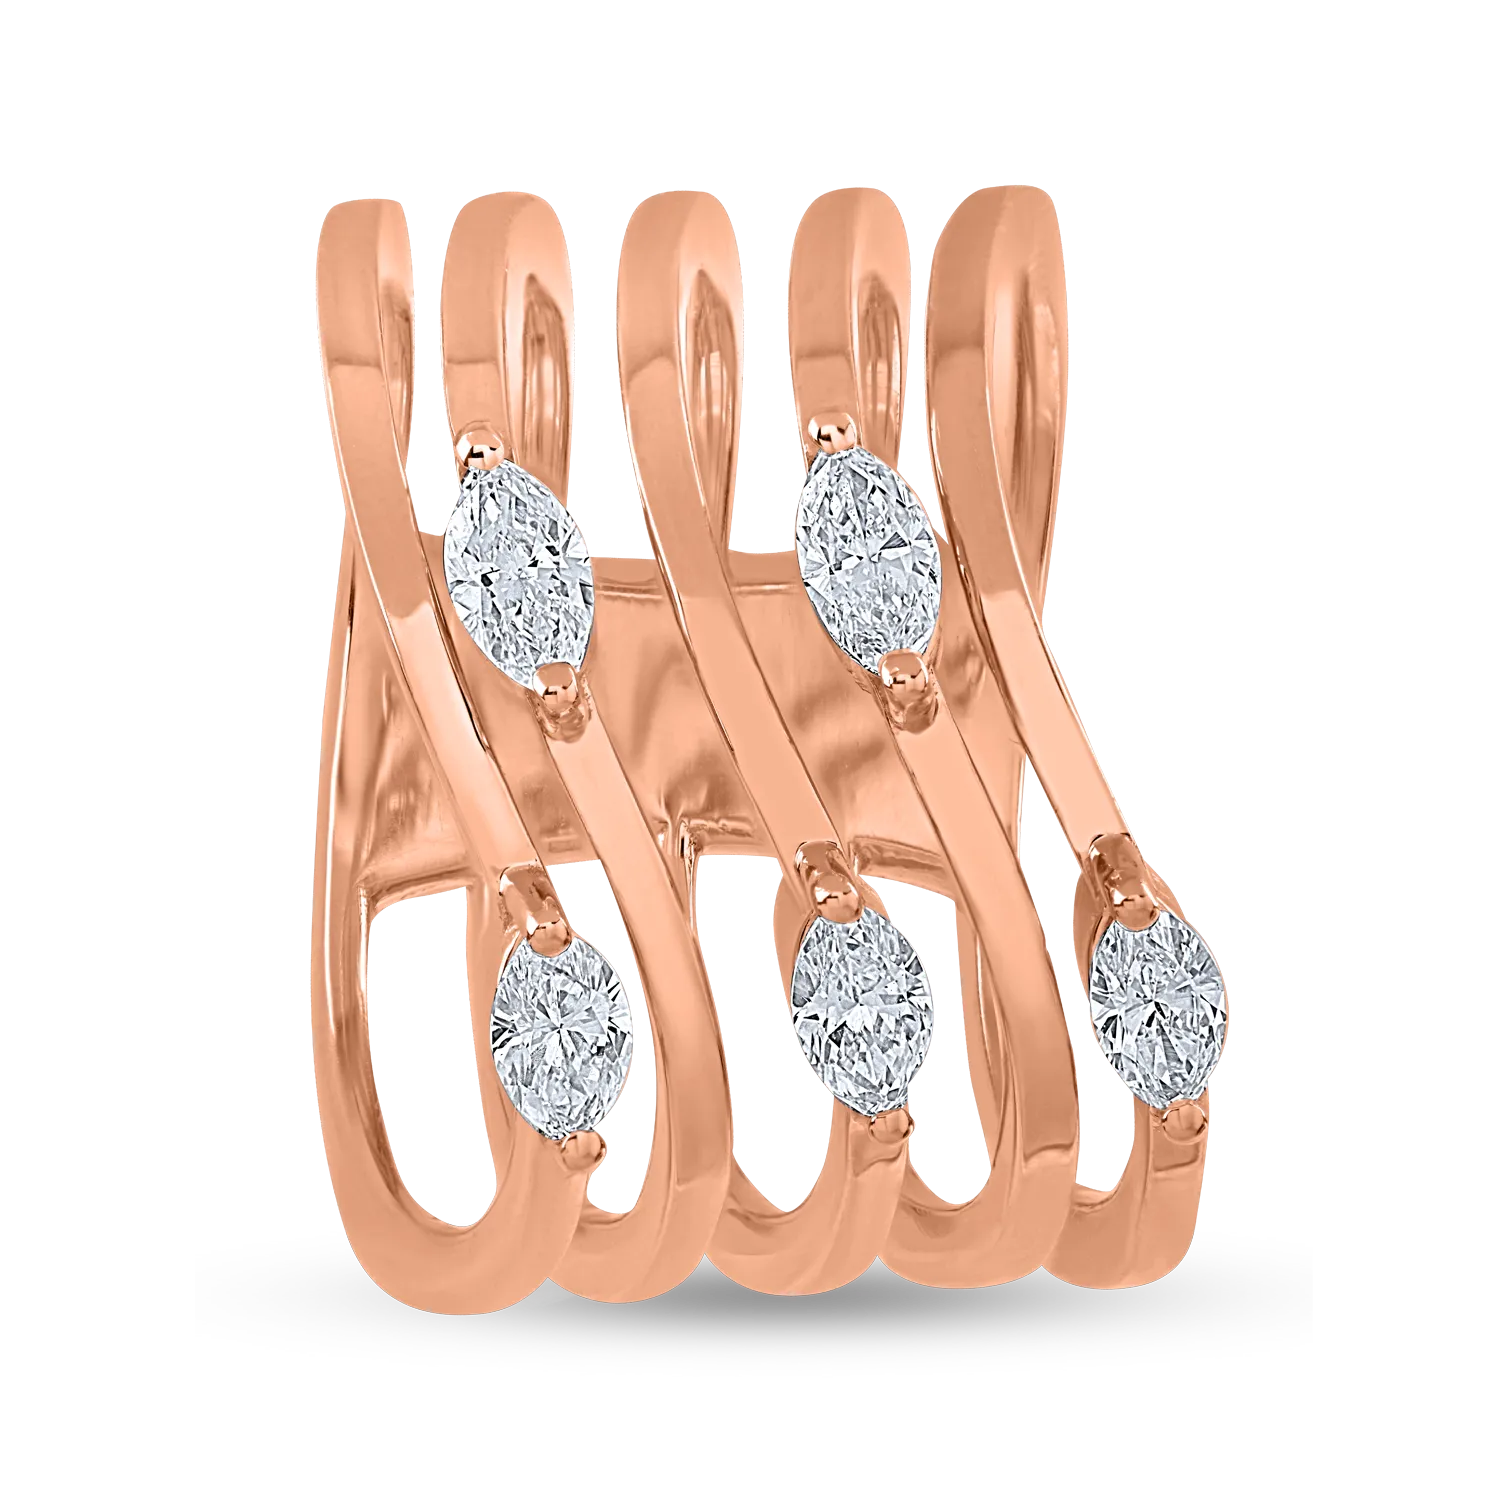 Rose gold ring with 0.62ct diamonds